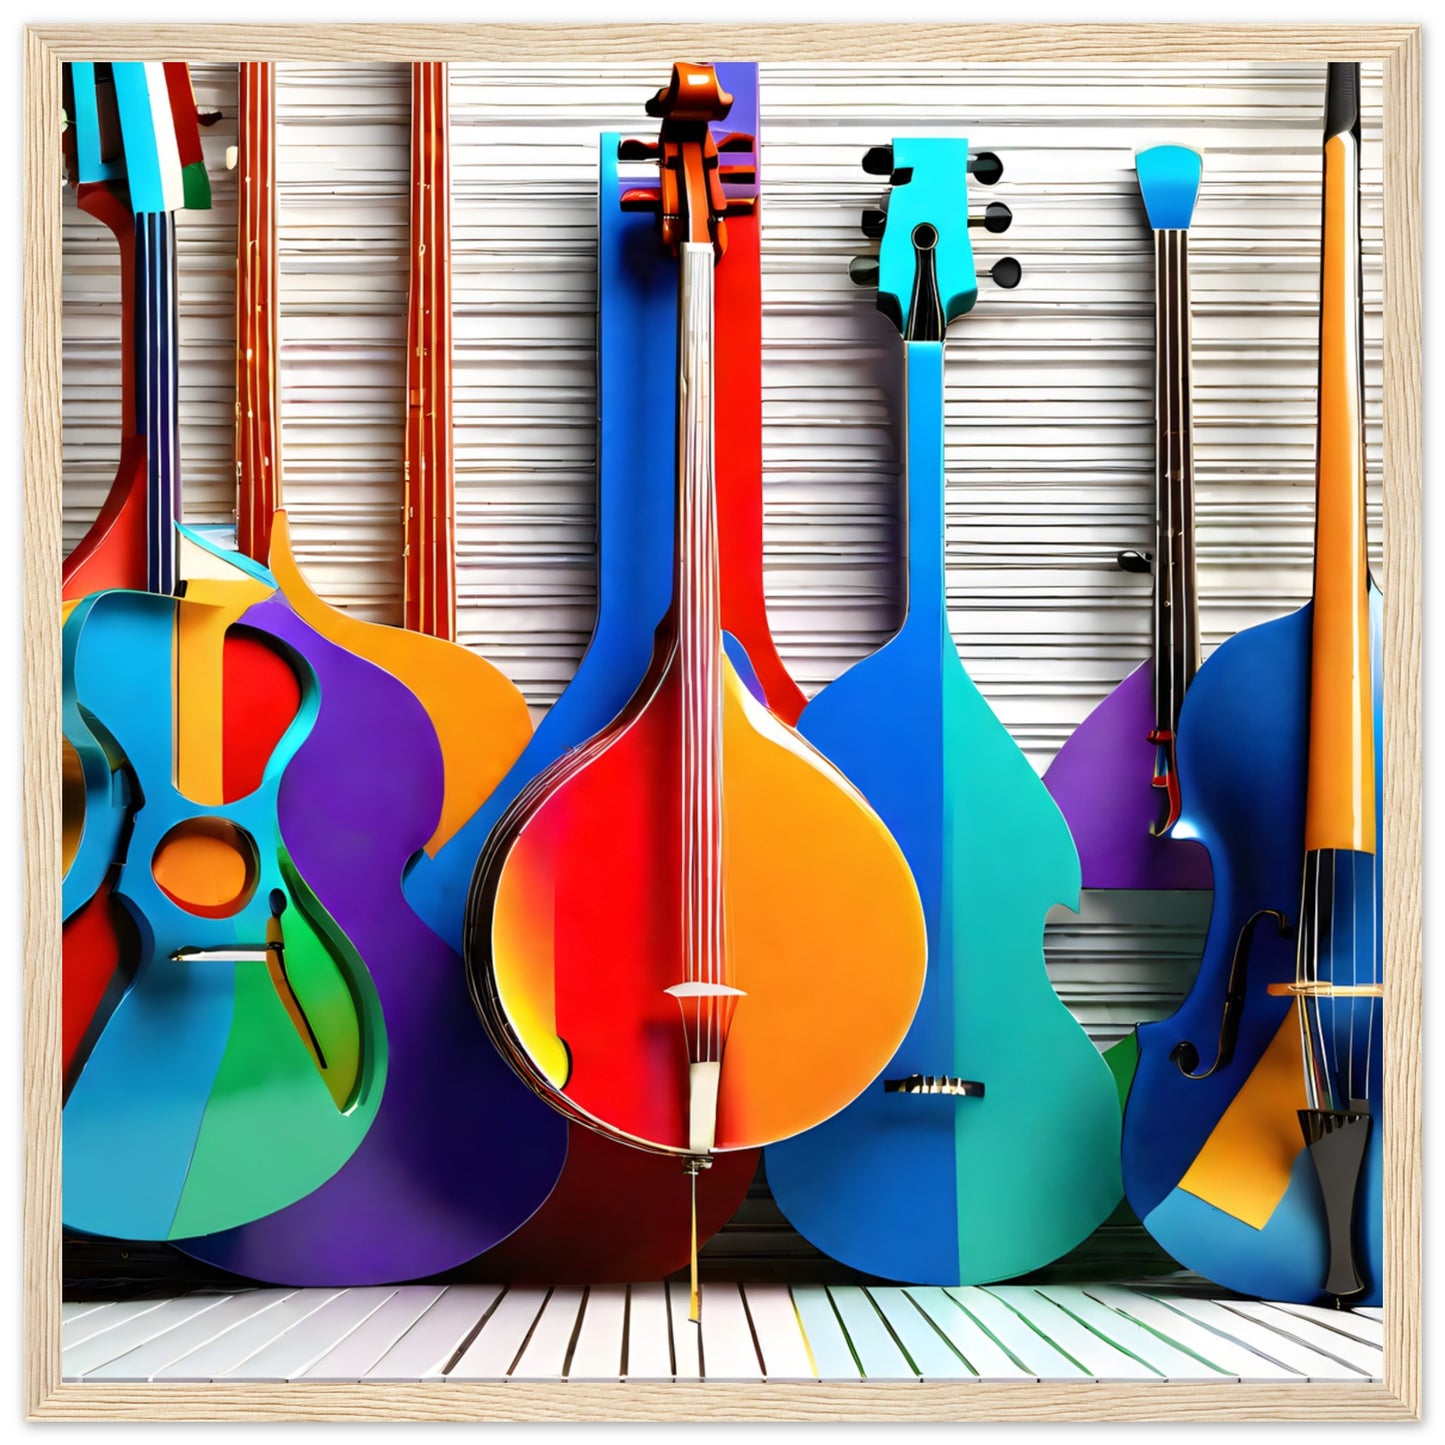 Colourful Guitars on Wall. 